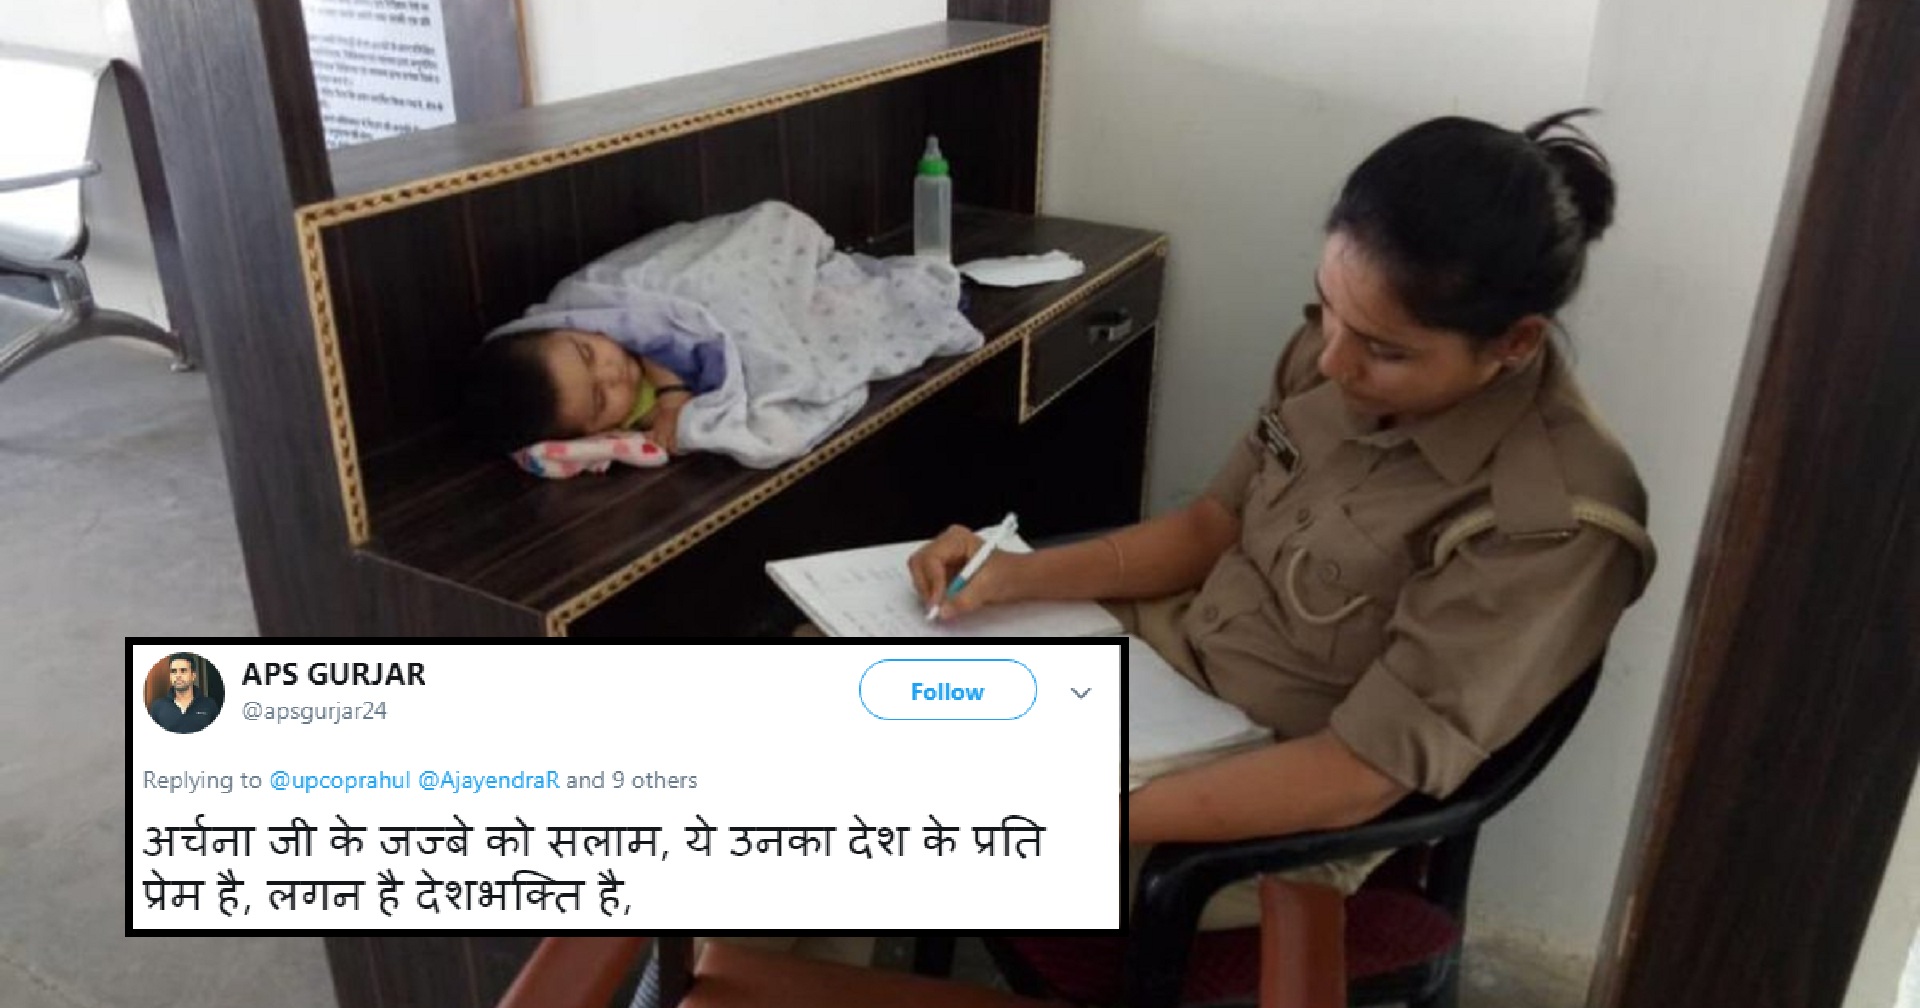 Female Cop Mothering Her Child While Also Severing People, Becomes Internet’s New ‘Viral Hero’!